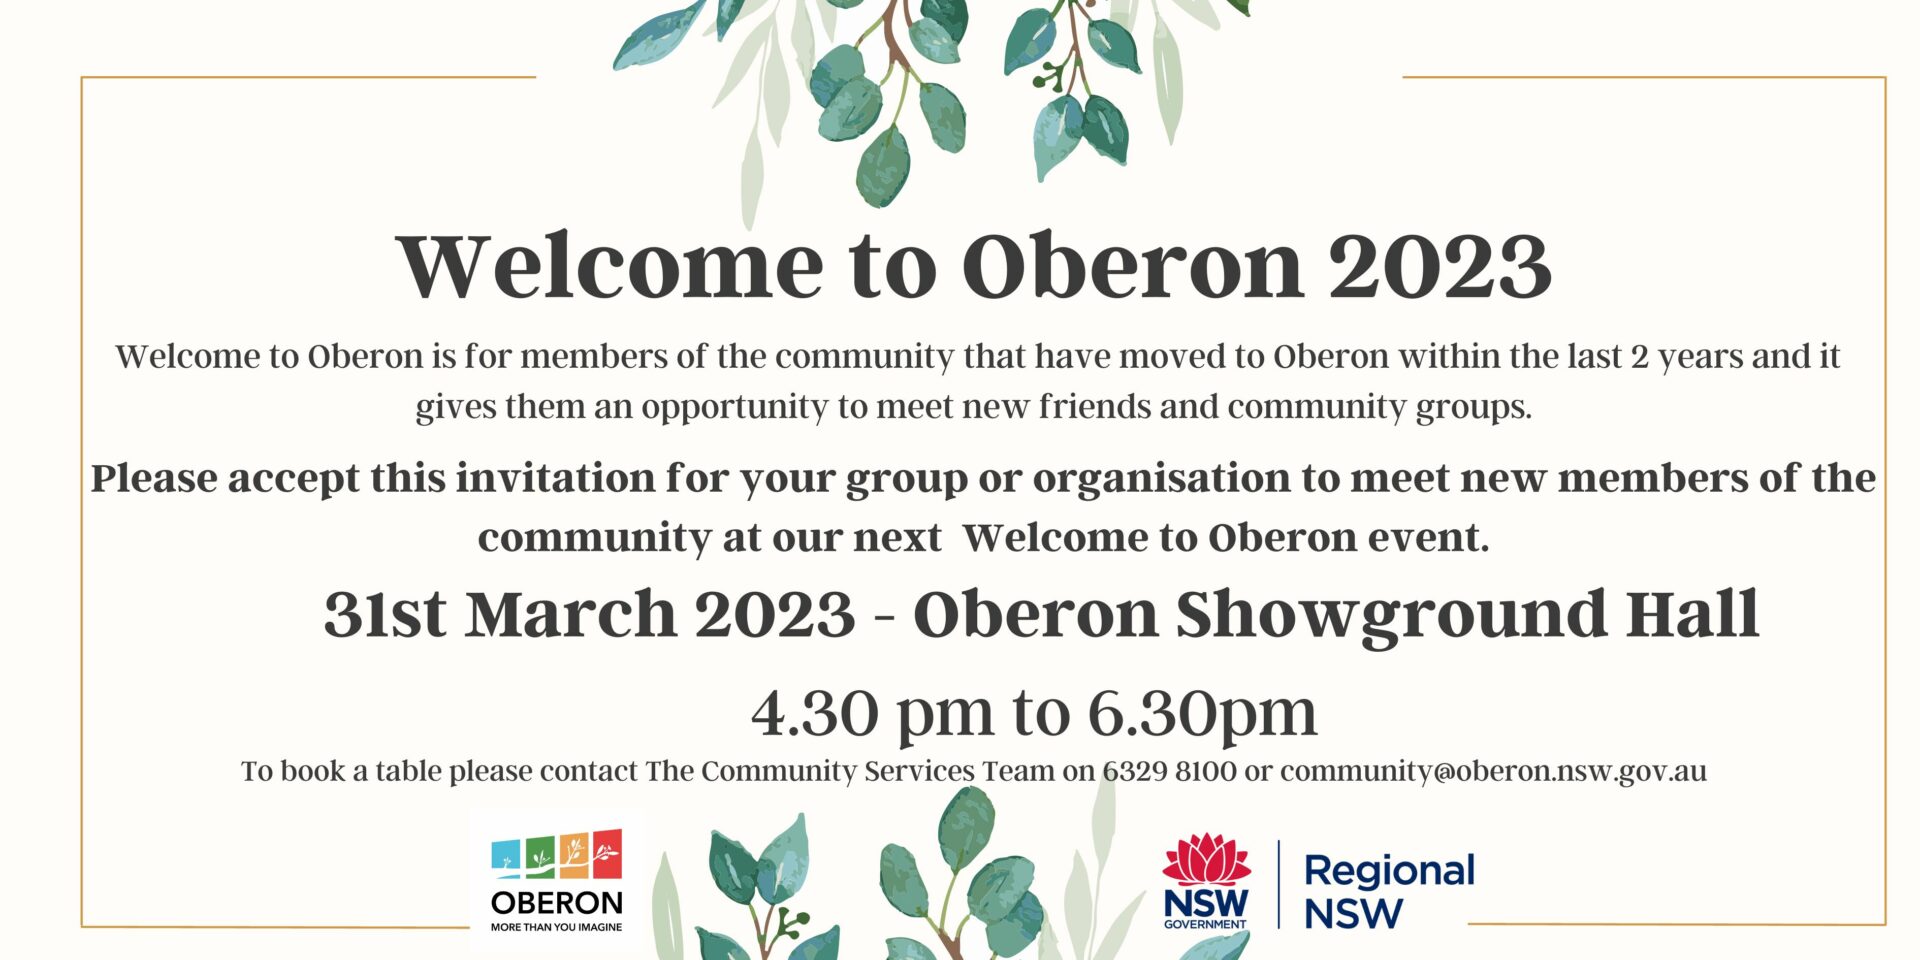 Welcome to Oberon 2023